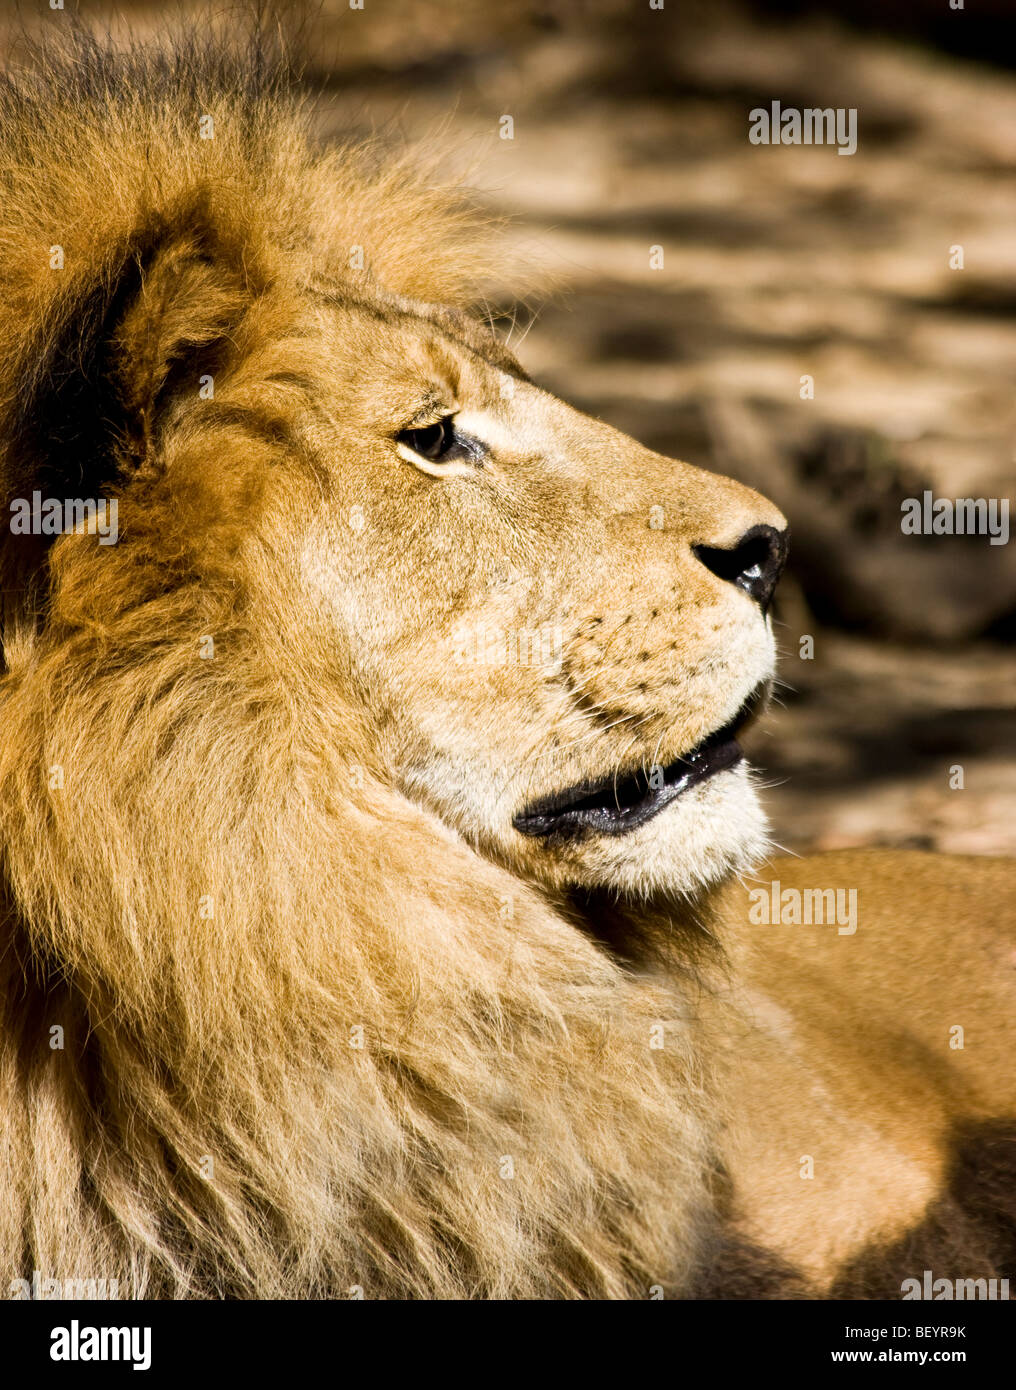 The 'profile' of an 'African lion' at the 'Los Angeles Zoo' in 'Los Angeles, California'. Stock Photo